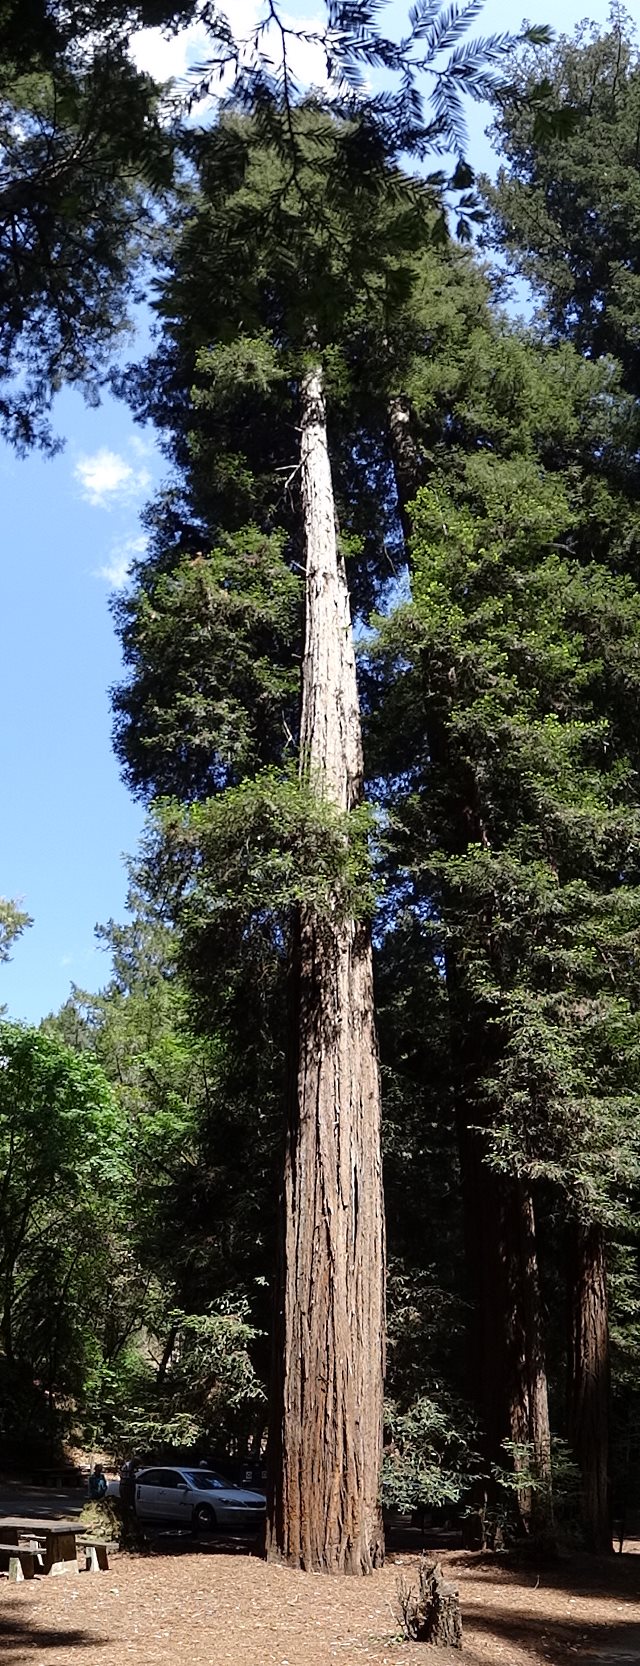 Sequoia sempervirens - Pacific Redwood - The tallest tree in the world. Majestic. Taller than the Statue of Liberty. Once they covered the world, but now only a few protected groves remain. (scroll down).